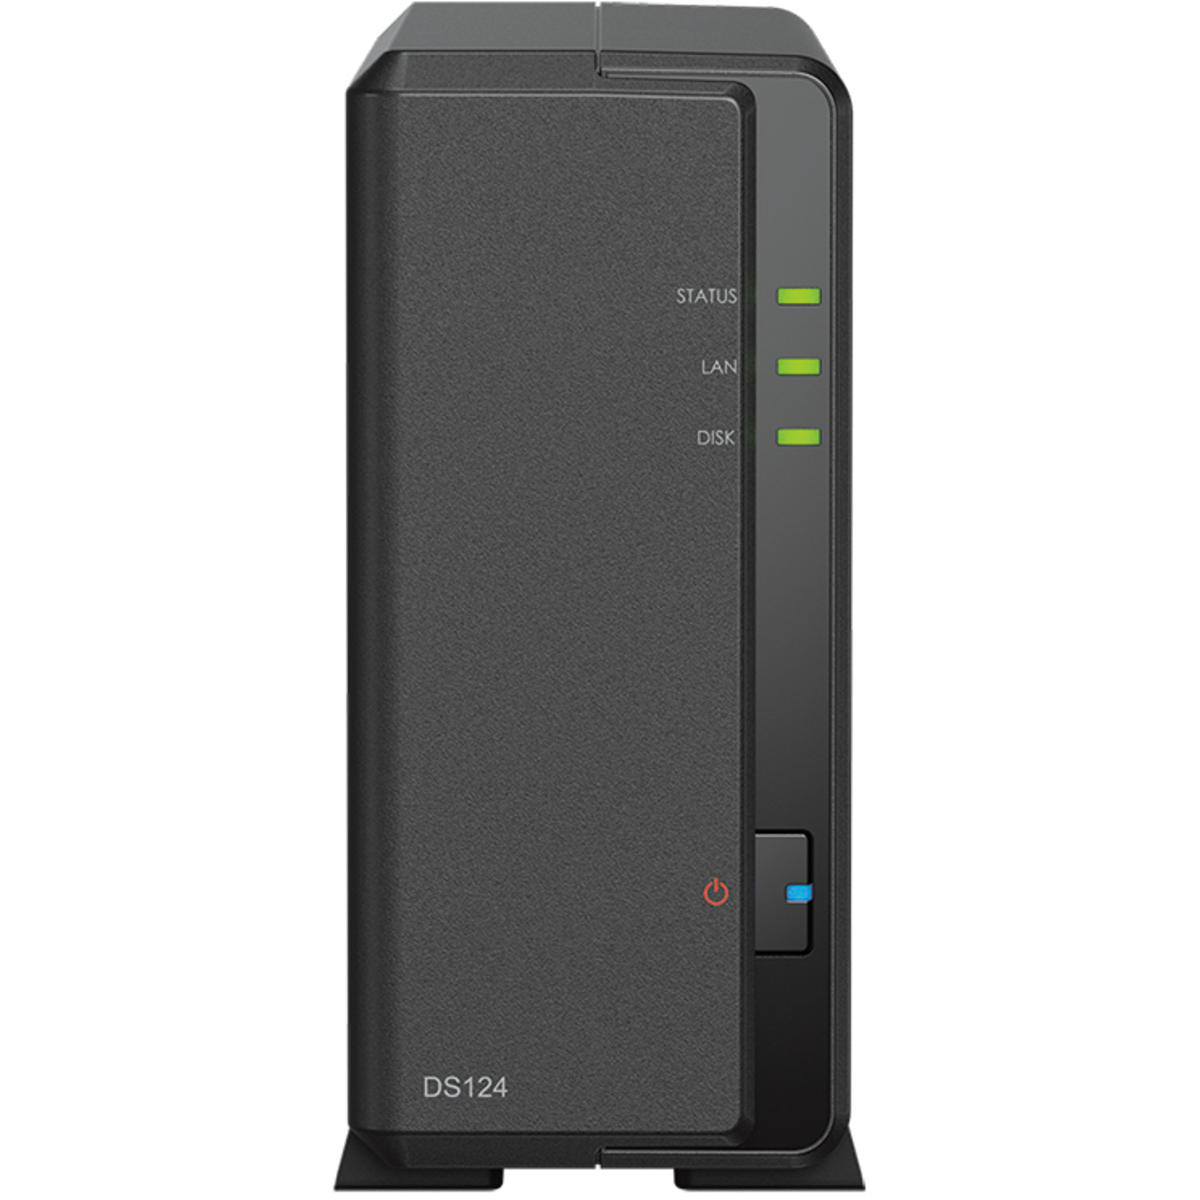 Synology DiskStation DS124 8tb 1-Bay Desktop Personal / Basic Home / Small Office NAS - Network Attached Storage Device 1x8tb Seagate IronWolf Pro ST8000NT001 3.5 7200rpm SATA 6Gb/s HDD NAS Class Drives Installed - Burn-In Tested - ON SALE DiskStation DS124